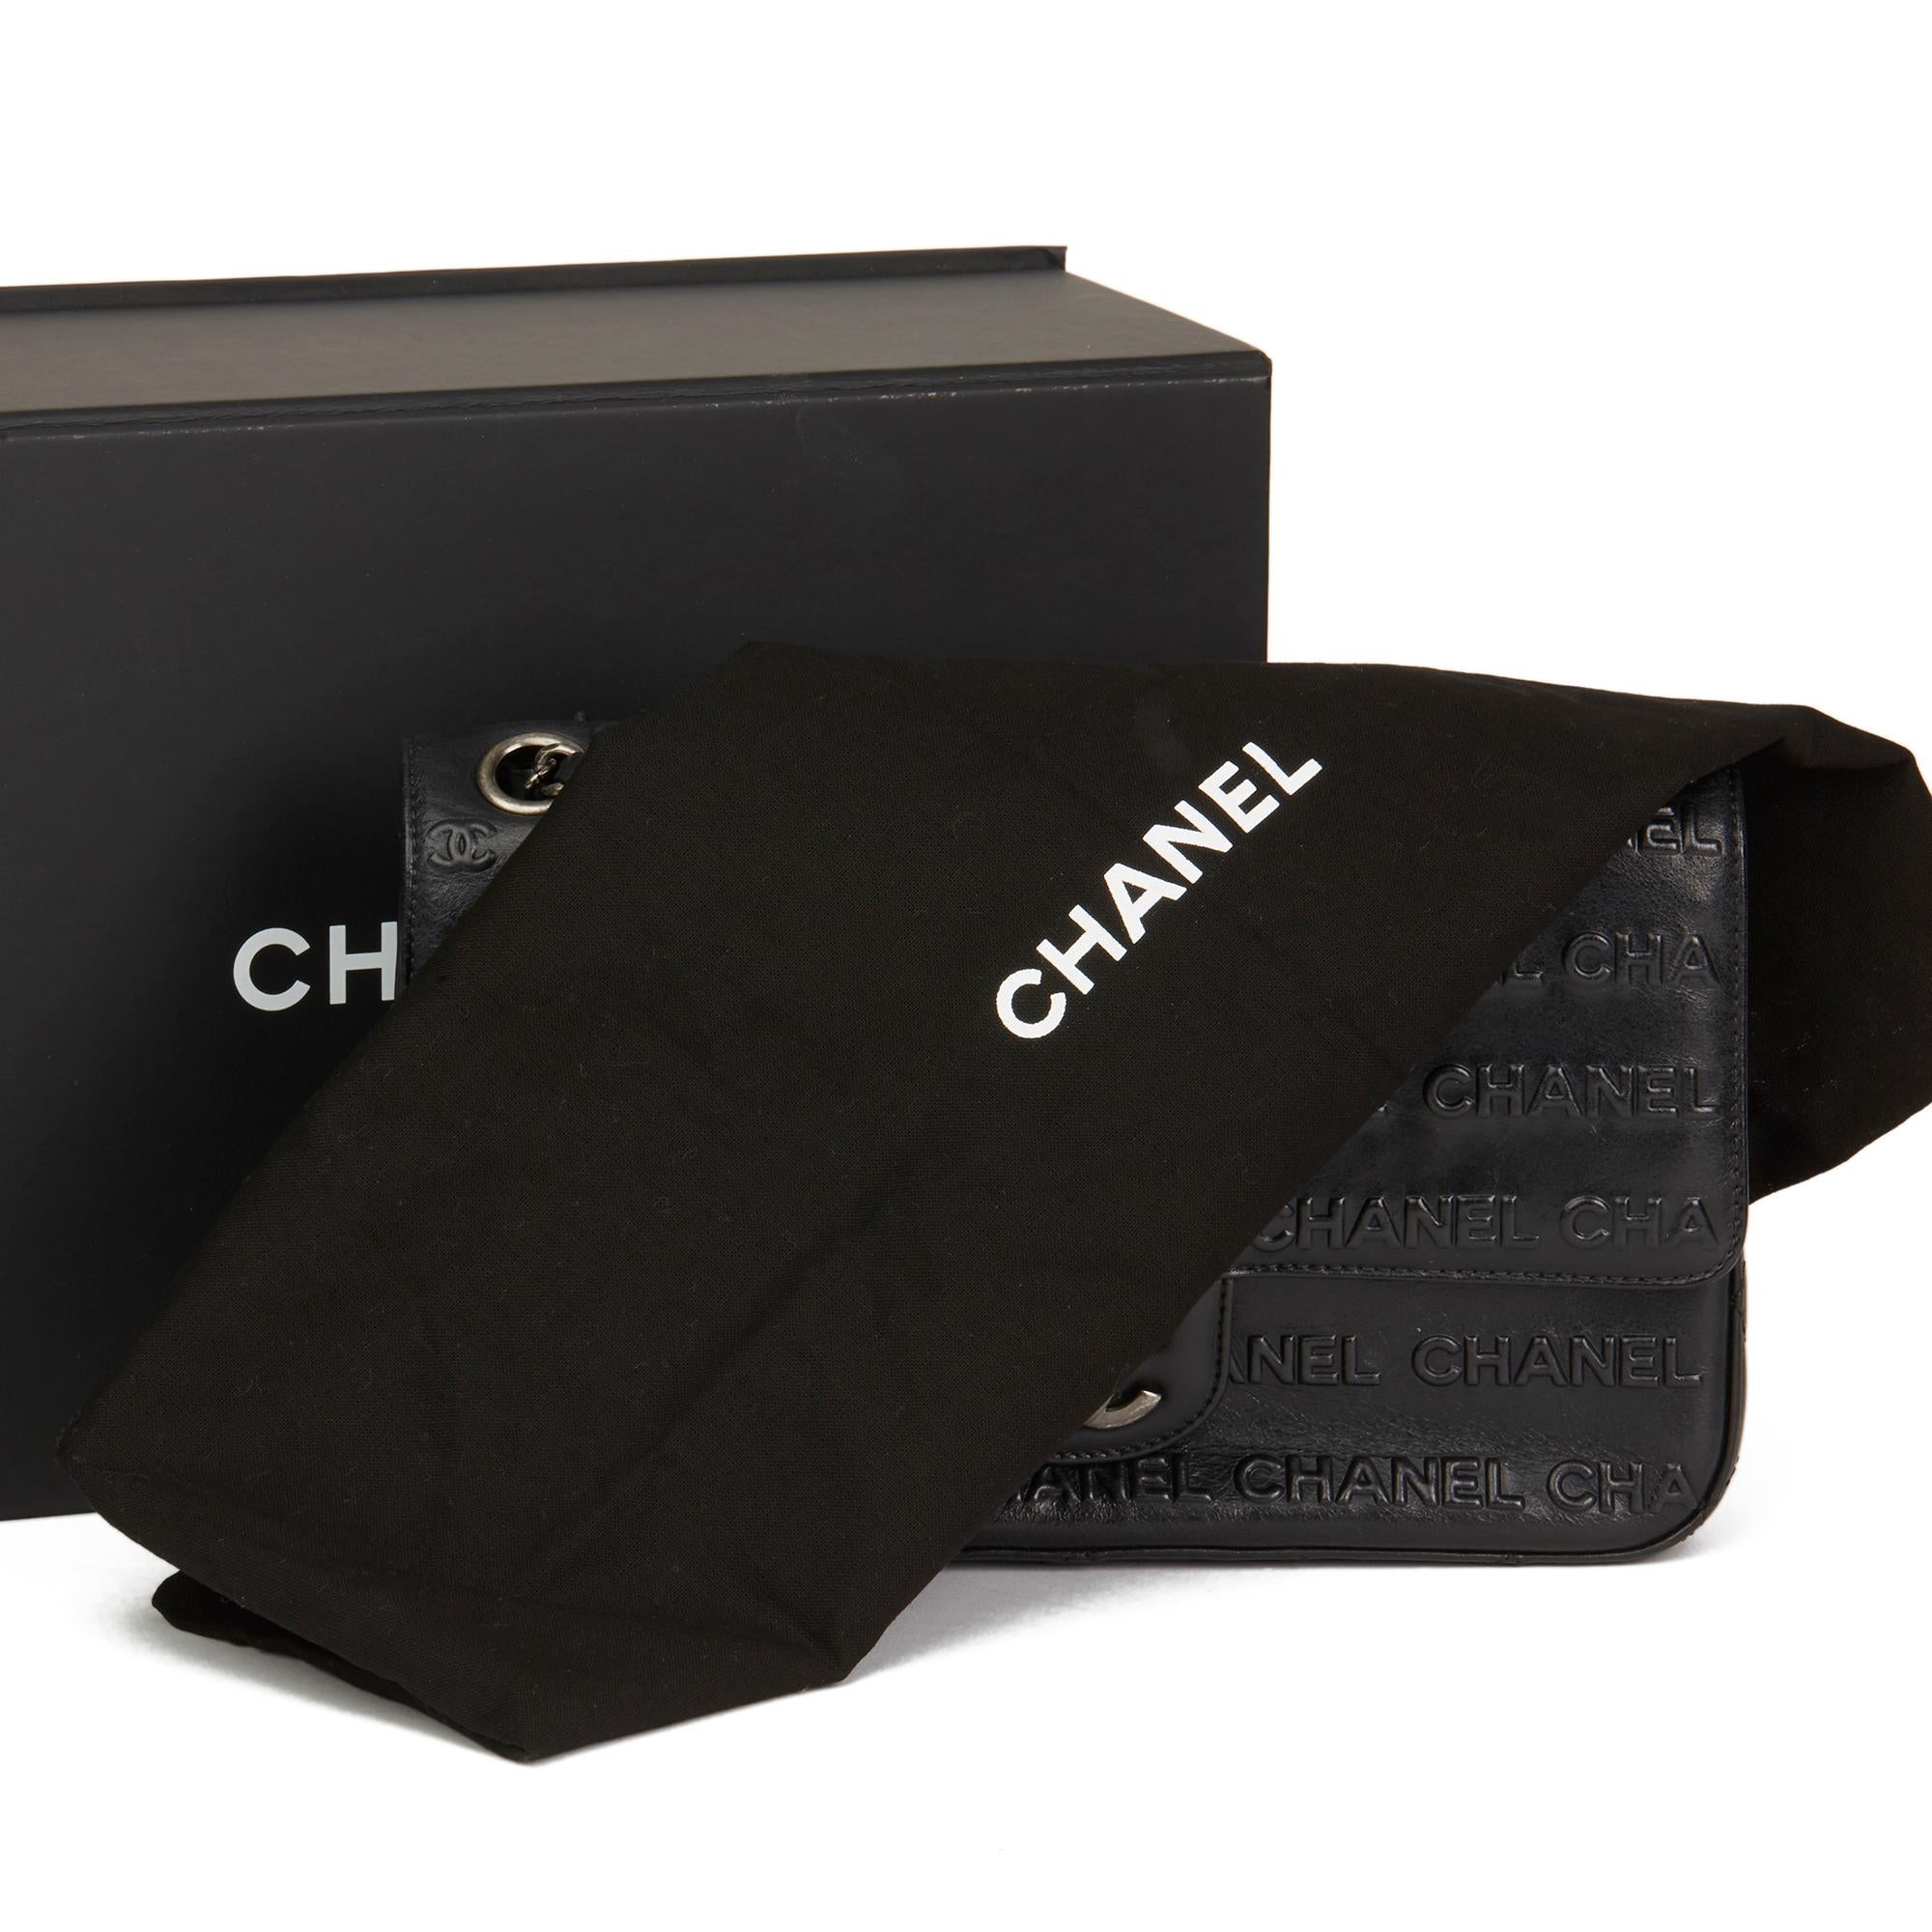 2014 Chanel Black Embossed & Quilted Calfskin Leather Paris-Dallas Classic Singl 7